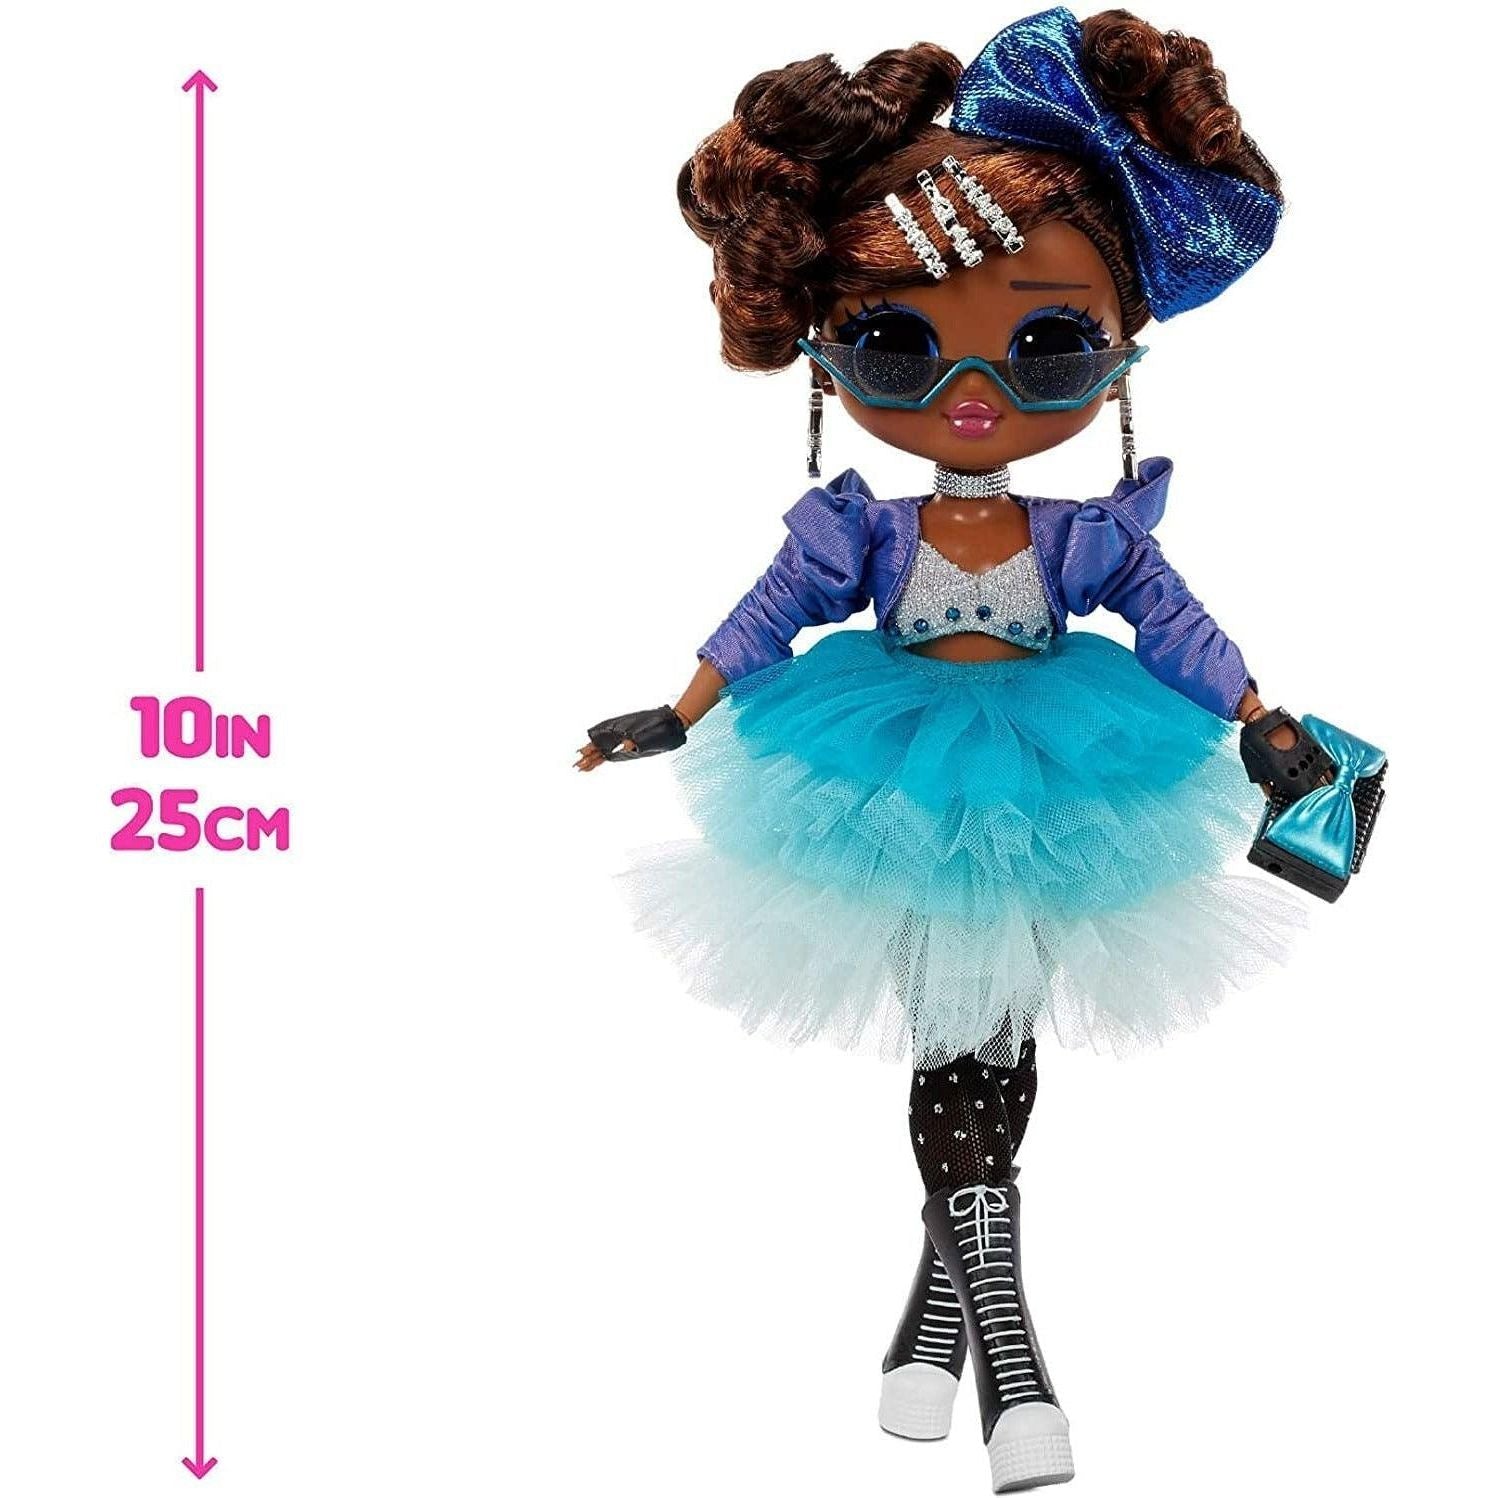 LOL Surprise OMG Present Surprise Fashion Doll Miss Glam with 20 Surprises - BumbleToys - 4+ Years, 5-7 Years, Amazon, Dolls, Fashion Dolls & Accessories, Girls, LOL, Pre-Order